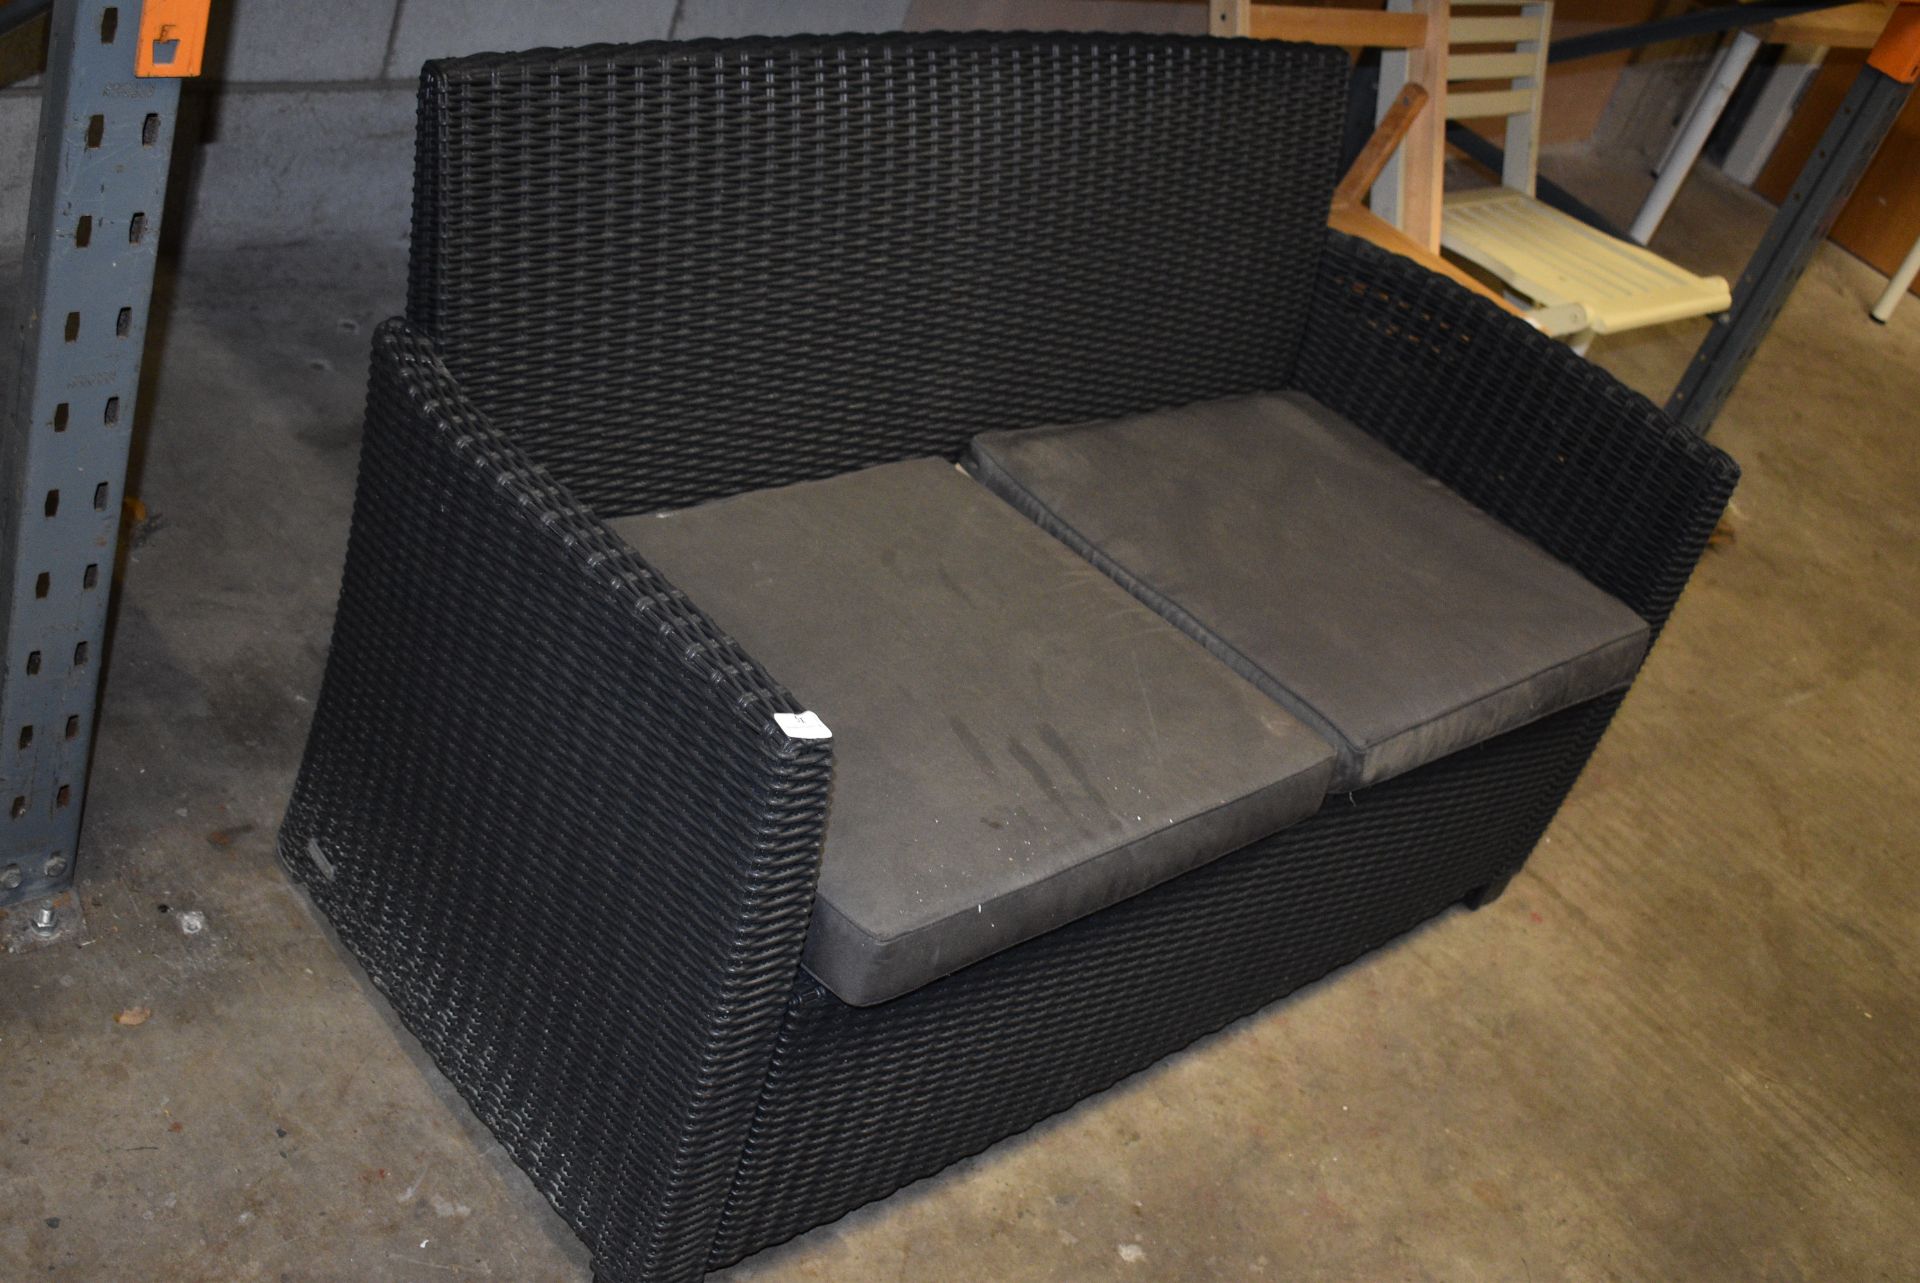 *Rattan Two Seat Sofa with Cushions